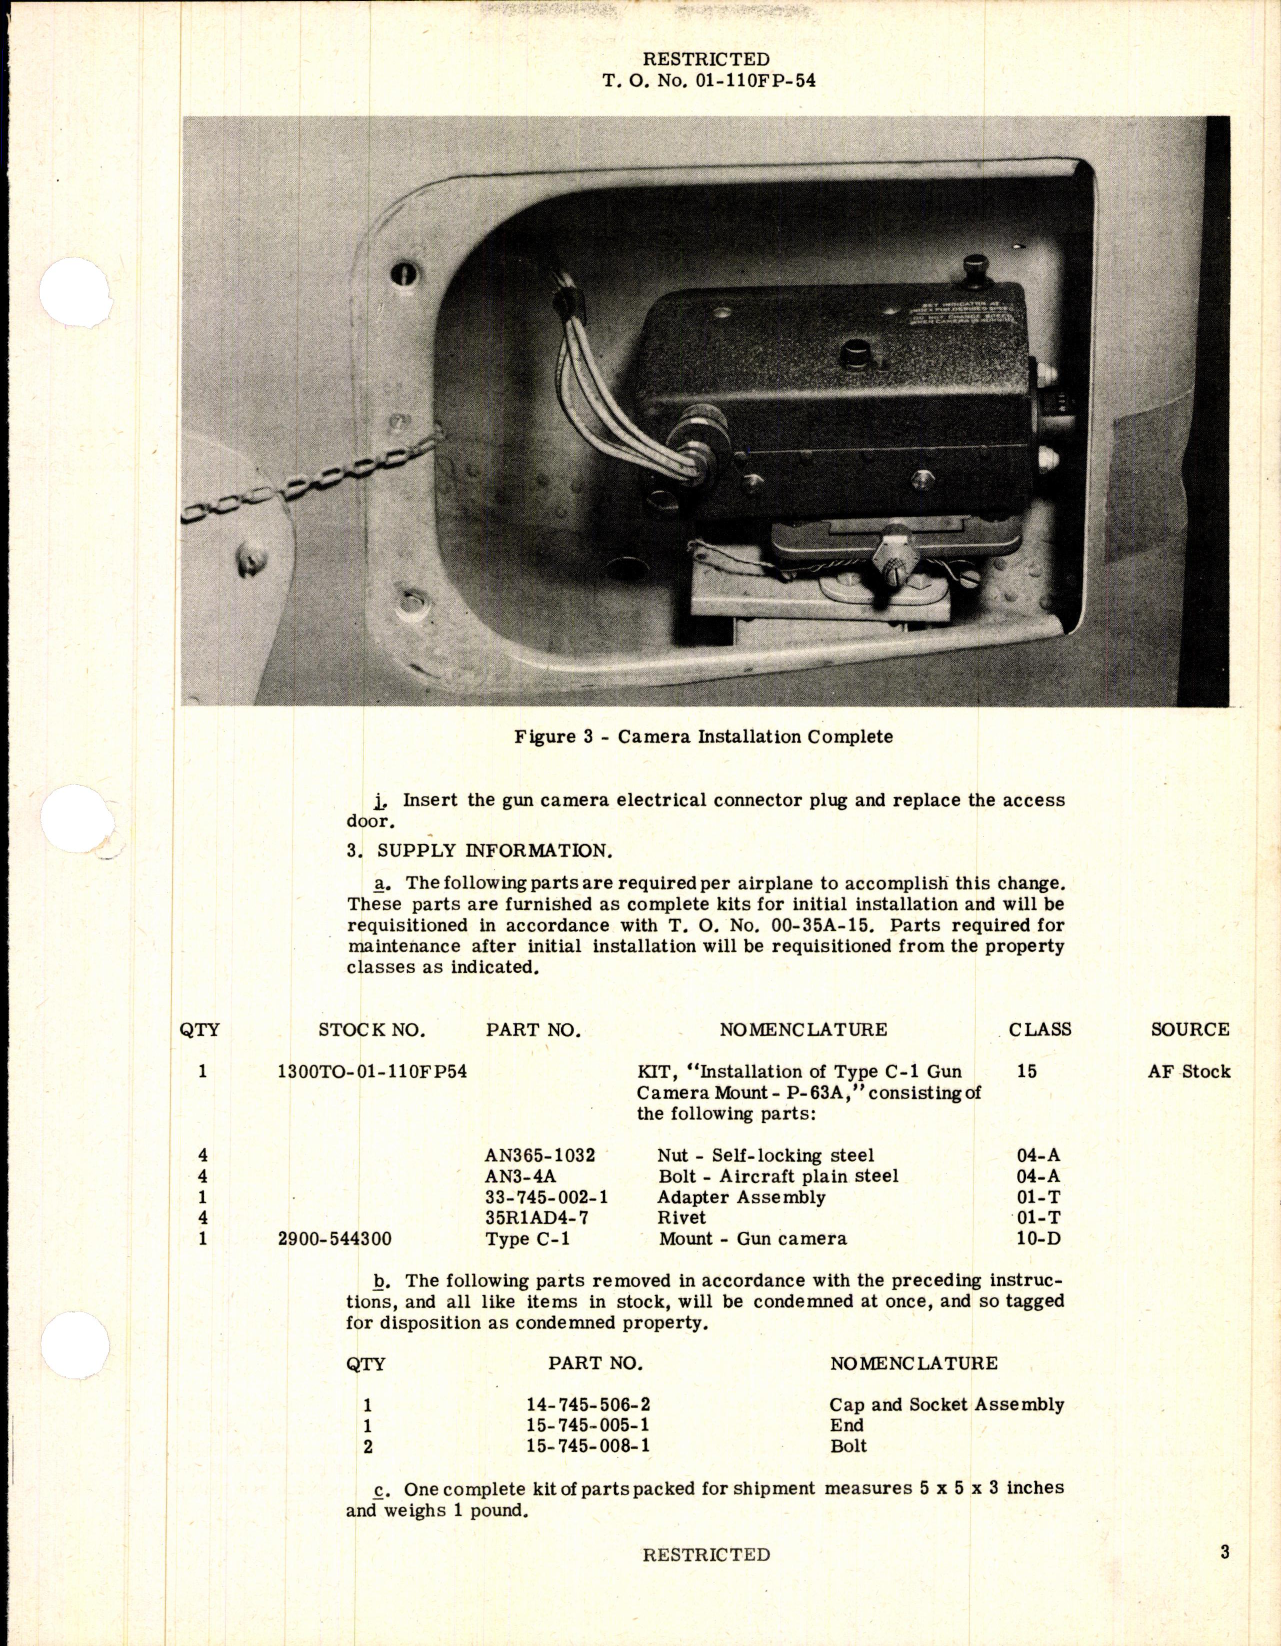 Sample page 3 from AirCorps Library document: Installation of Type C-1 Gun Camera Mount for P-63A